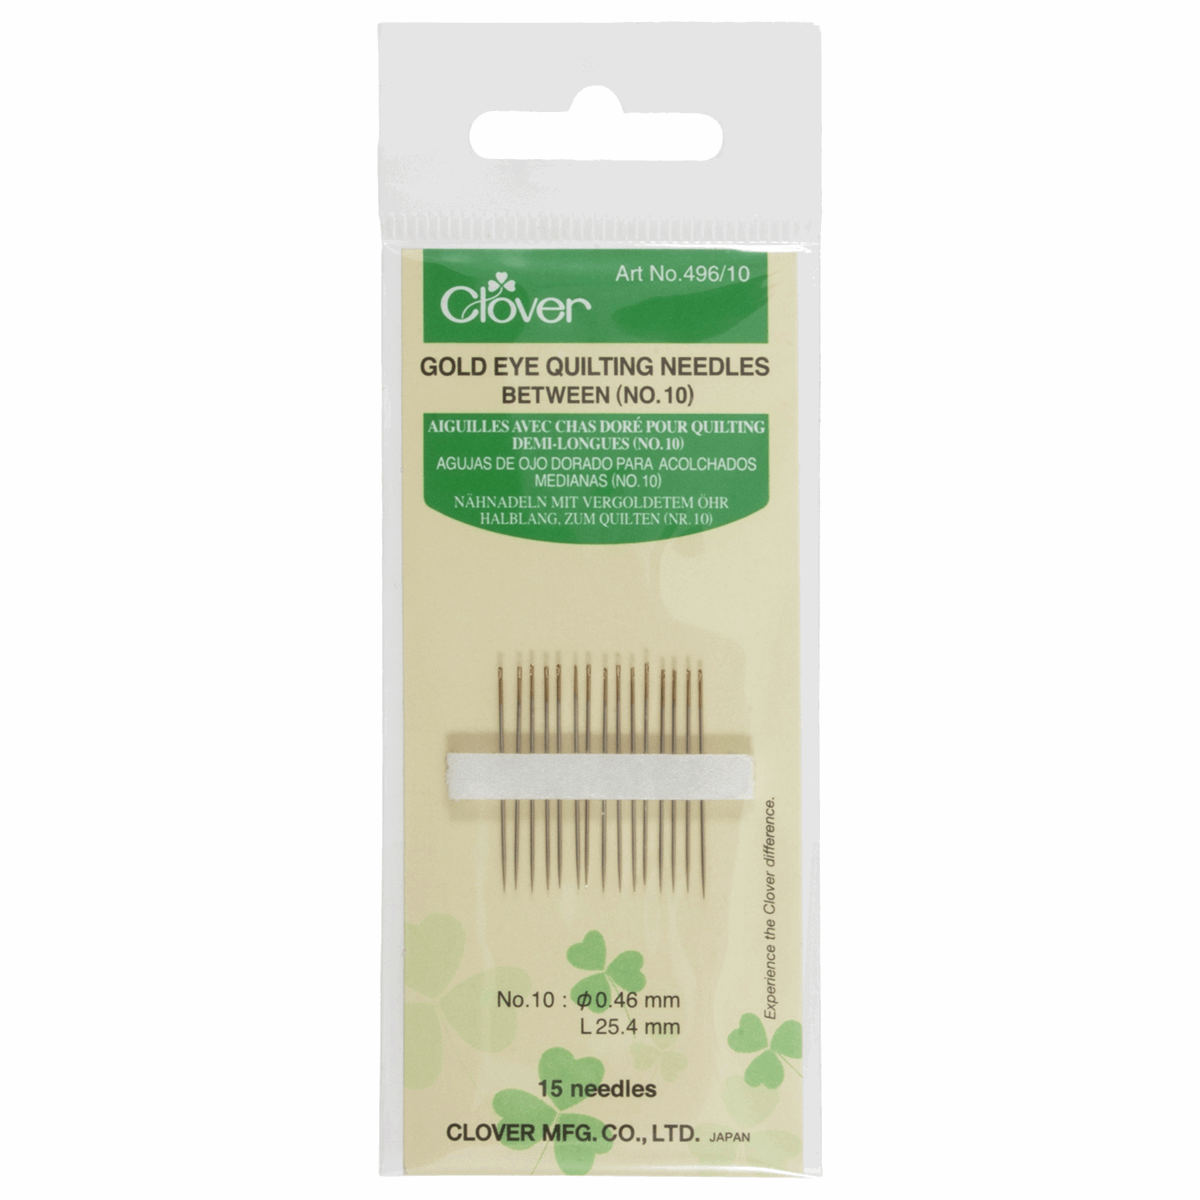 Clover Gold Eye Hand Quilting/Betweens Needles - Size No.10 (Pack of 15)